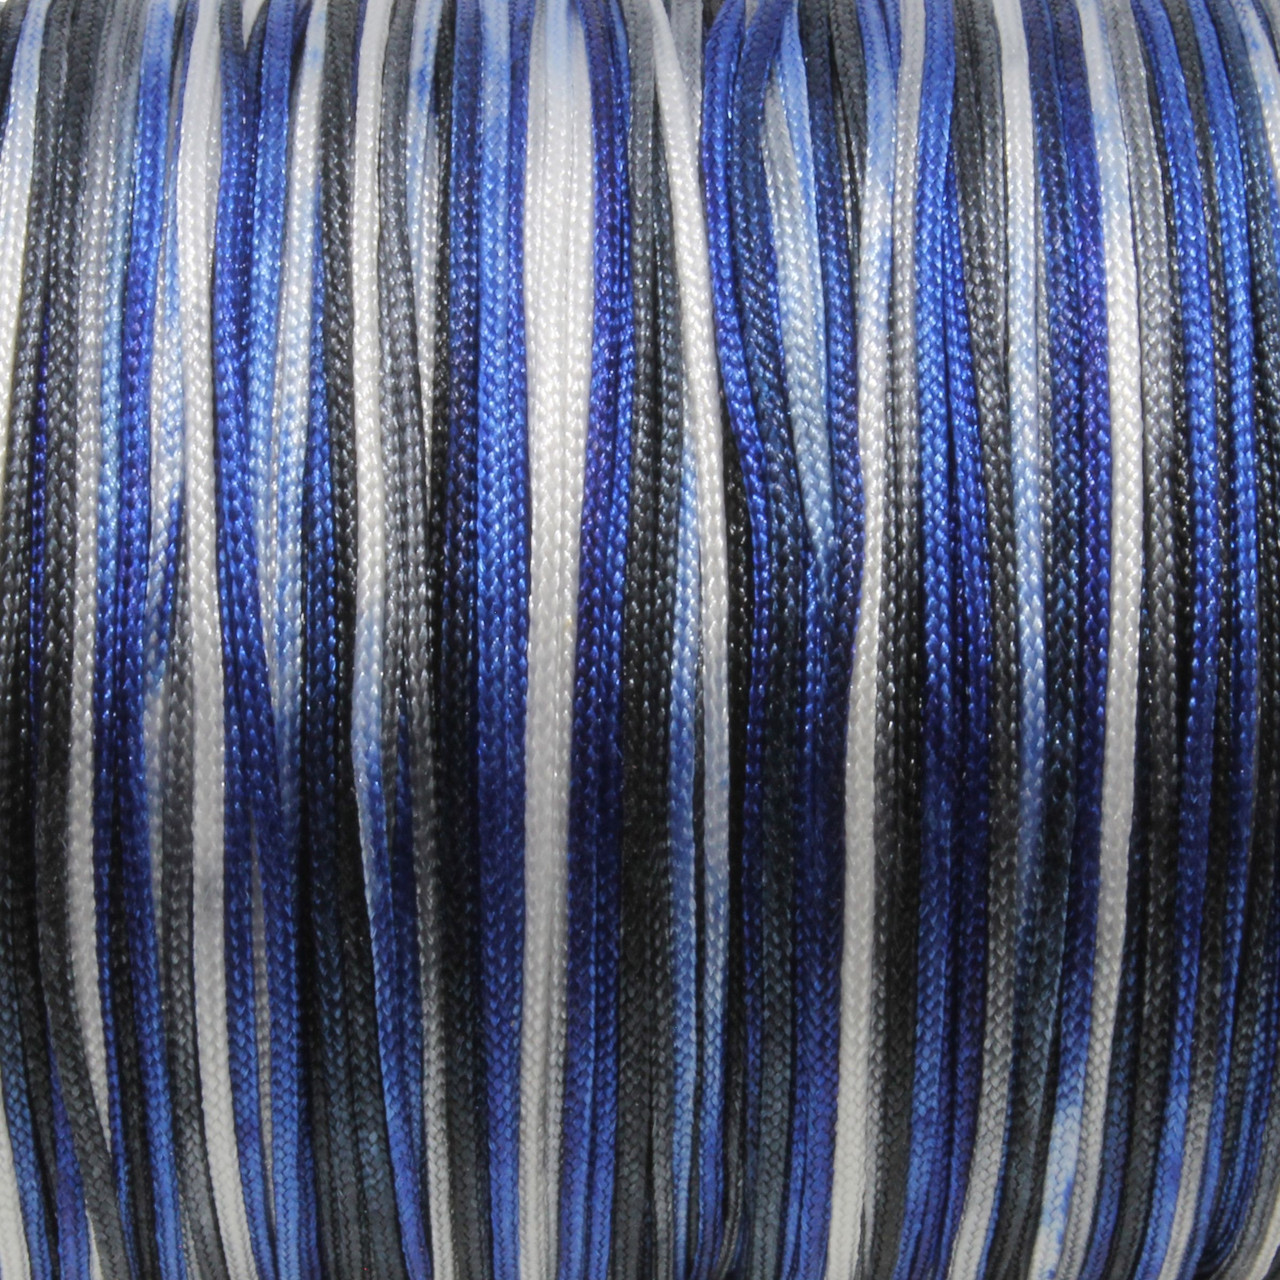 Blue Mix - 1mm Nylon Chinese Knotting Cord - Sold by the Foot